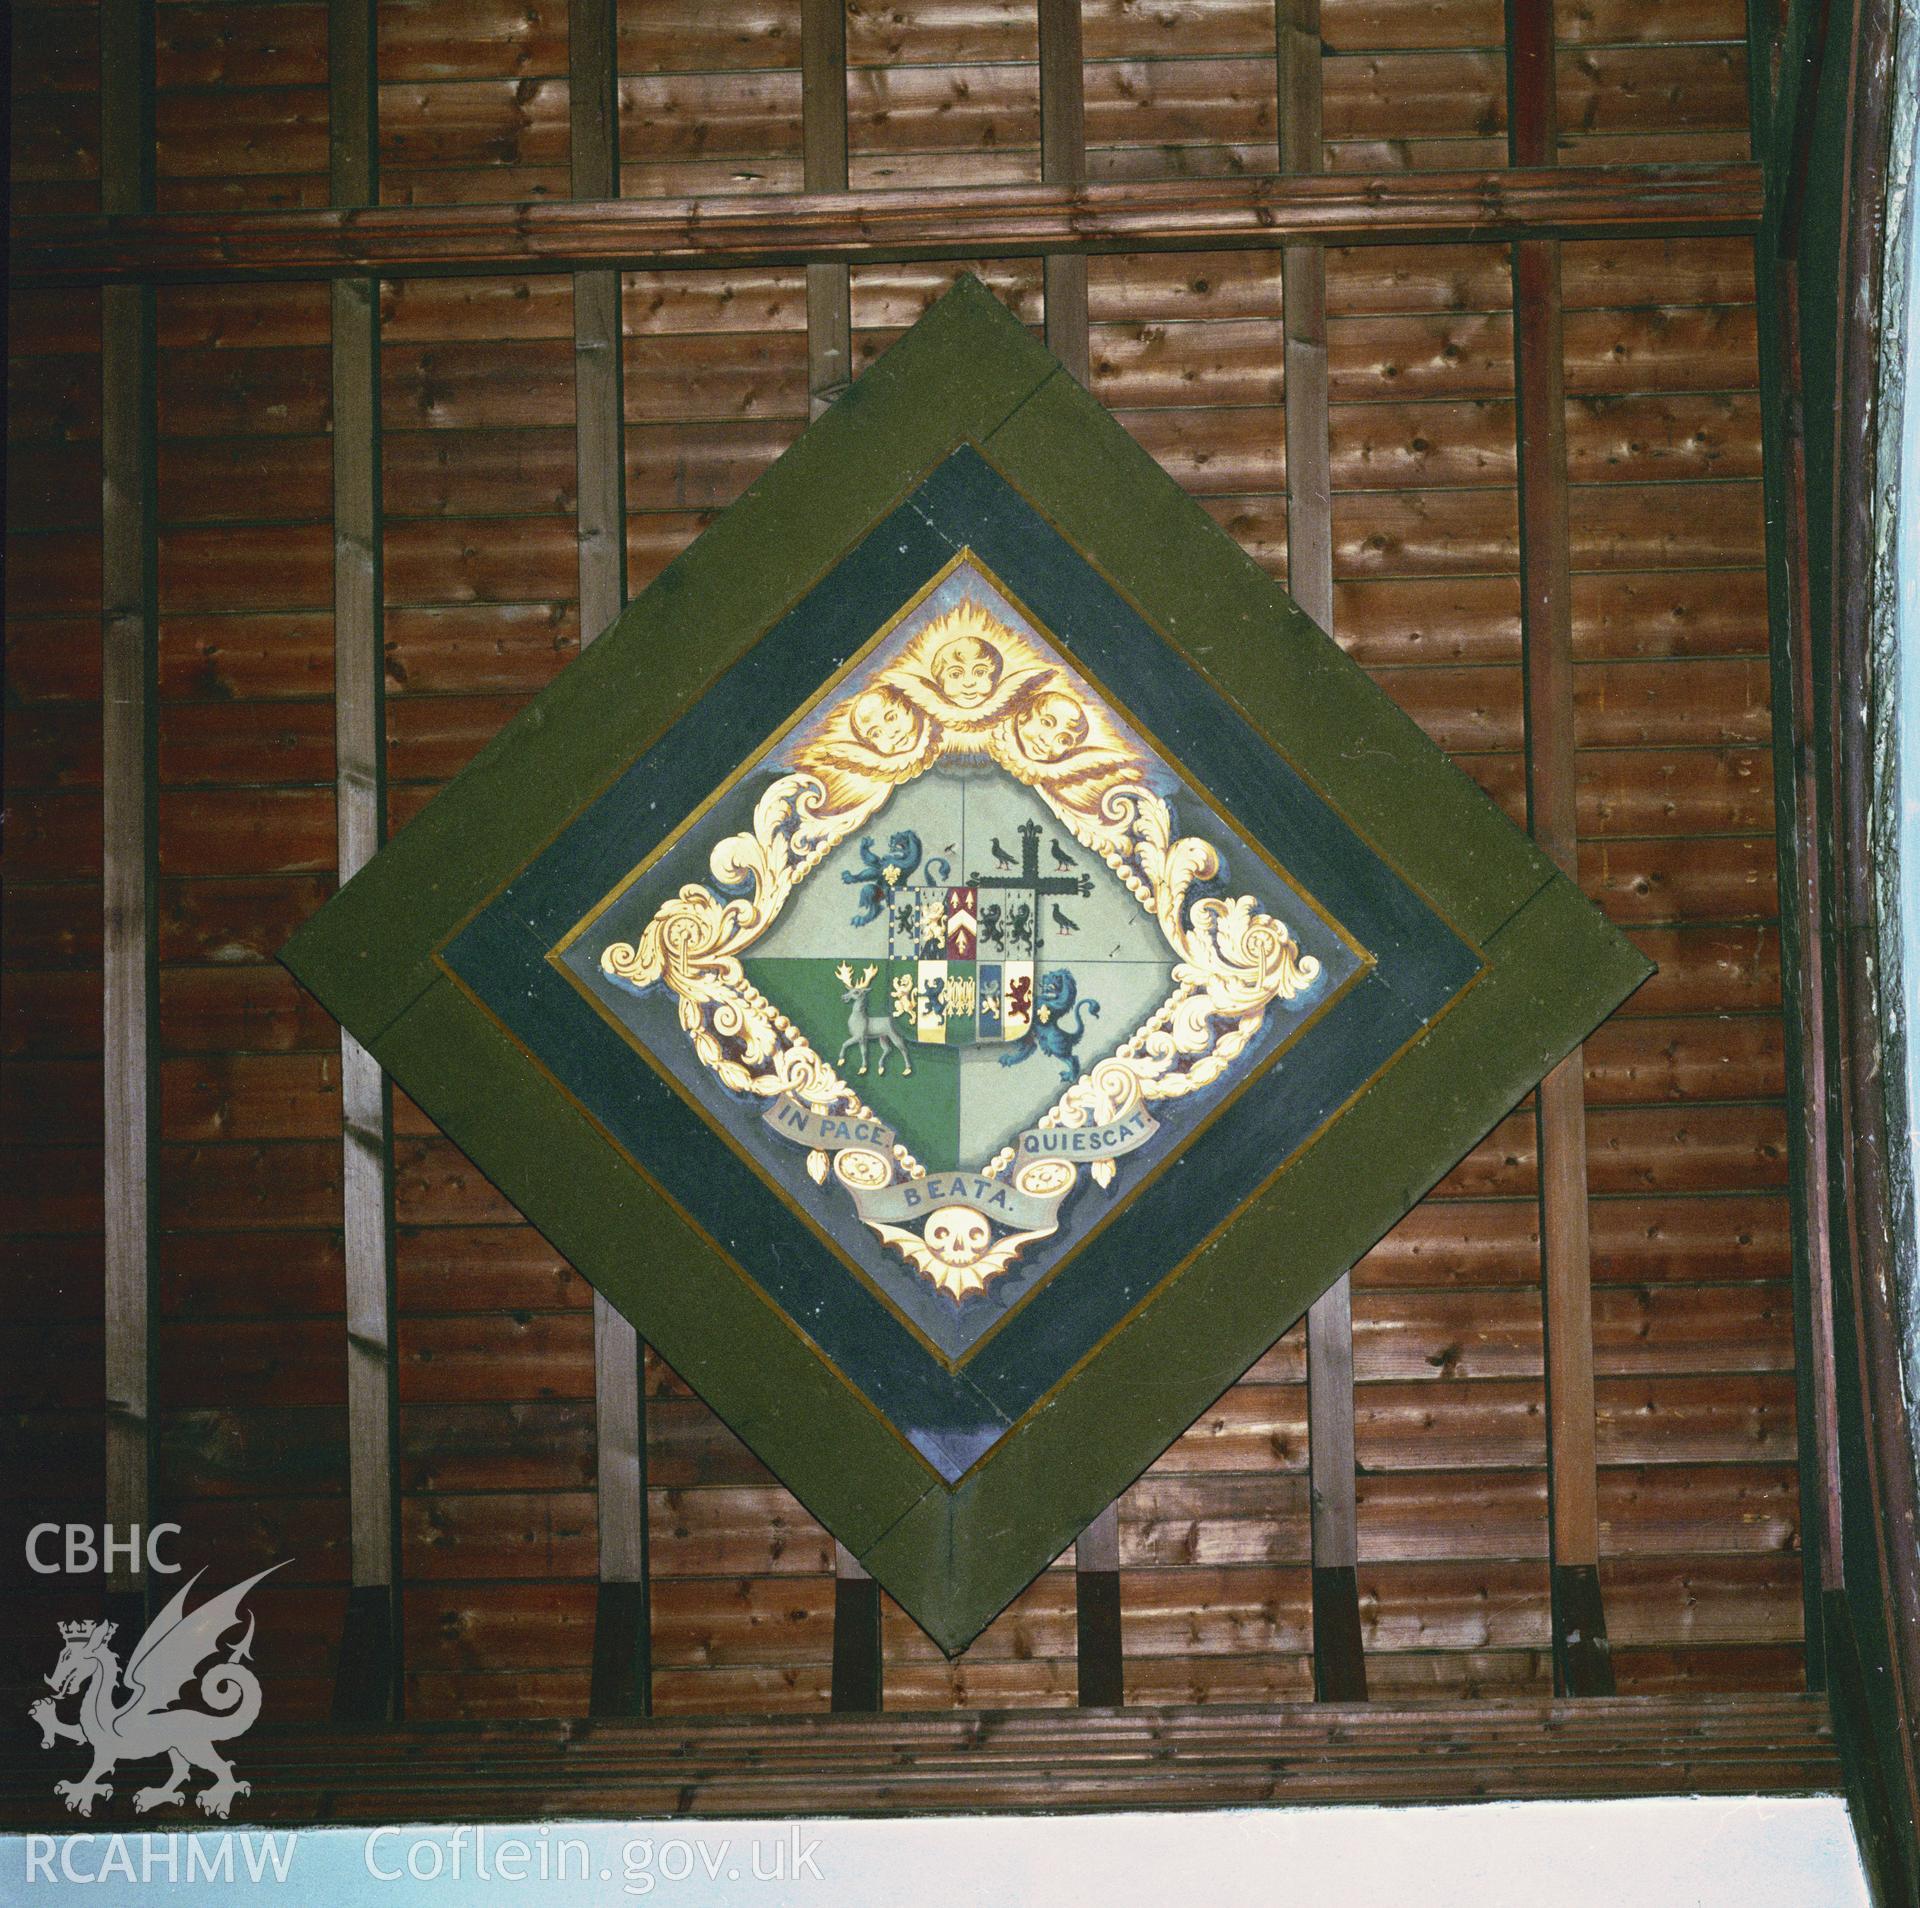 RCAHMW colour transparency showing a ceiling-mounted armorial panel at Ruabon Church, taken by I.N. Wright, 2003